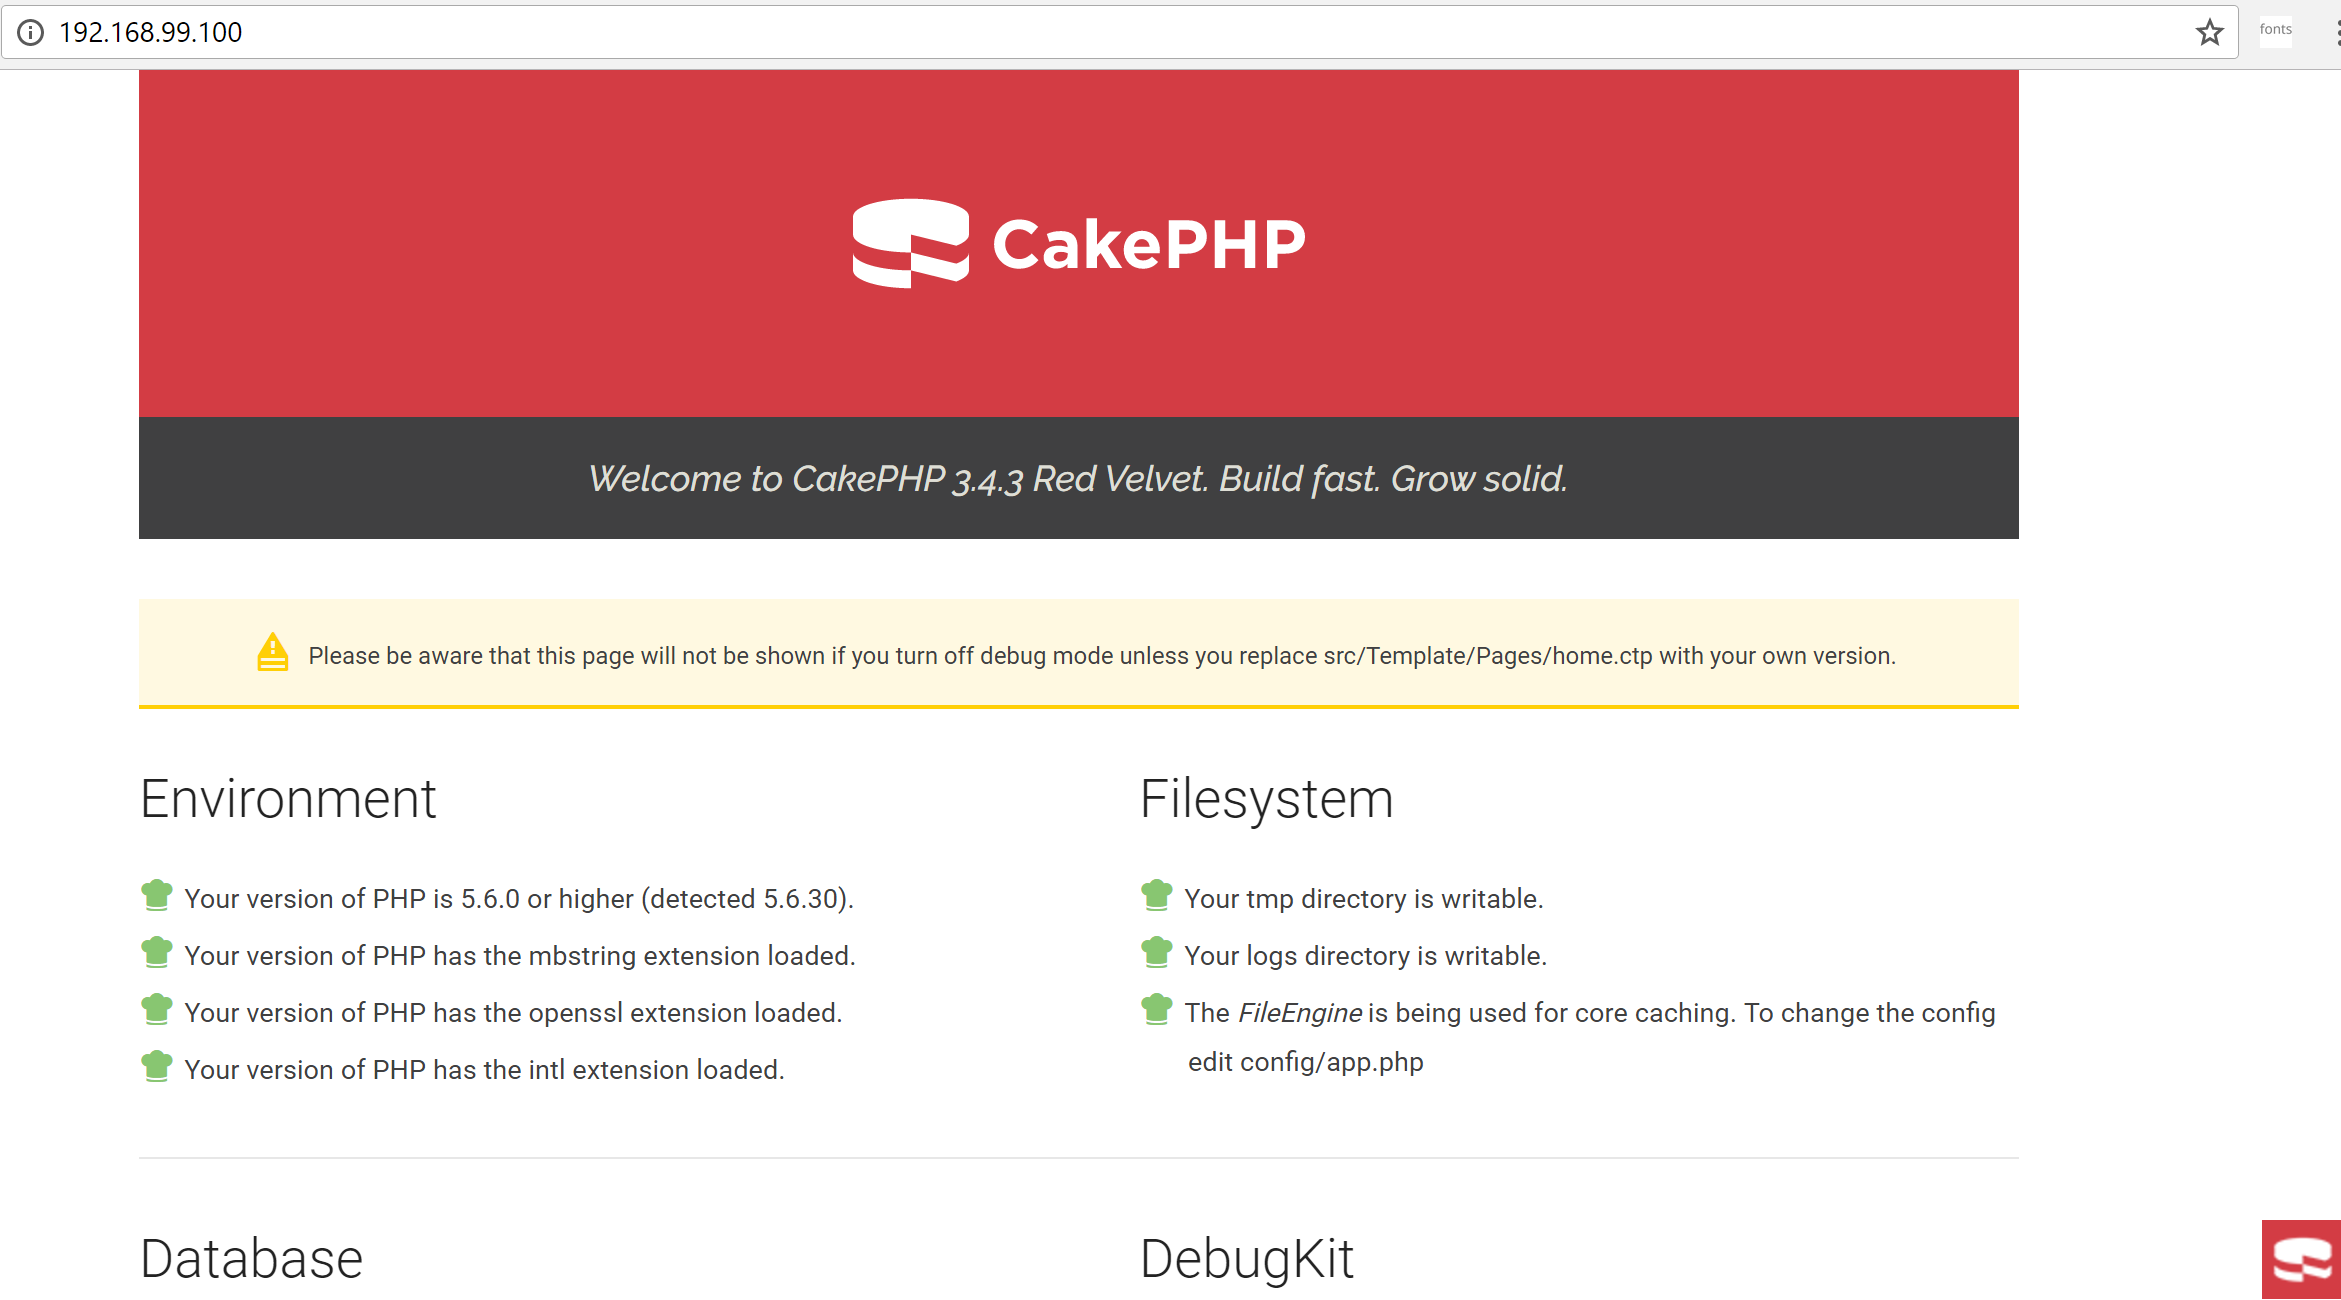 sc_cakephp.png